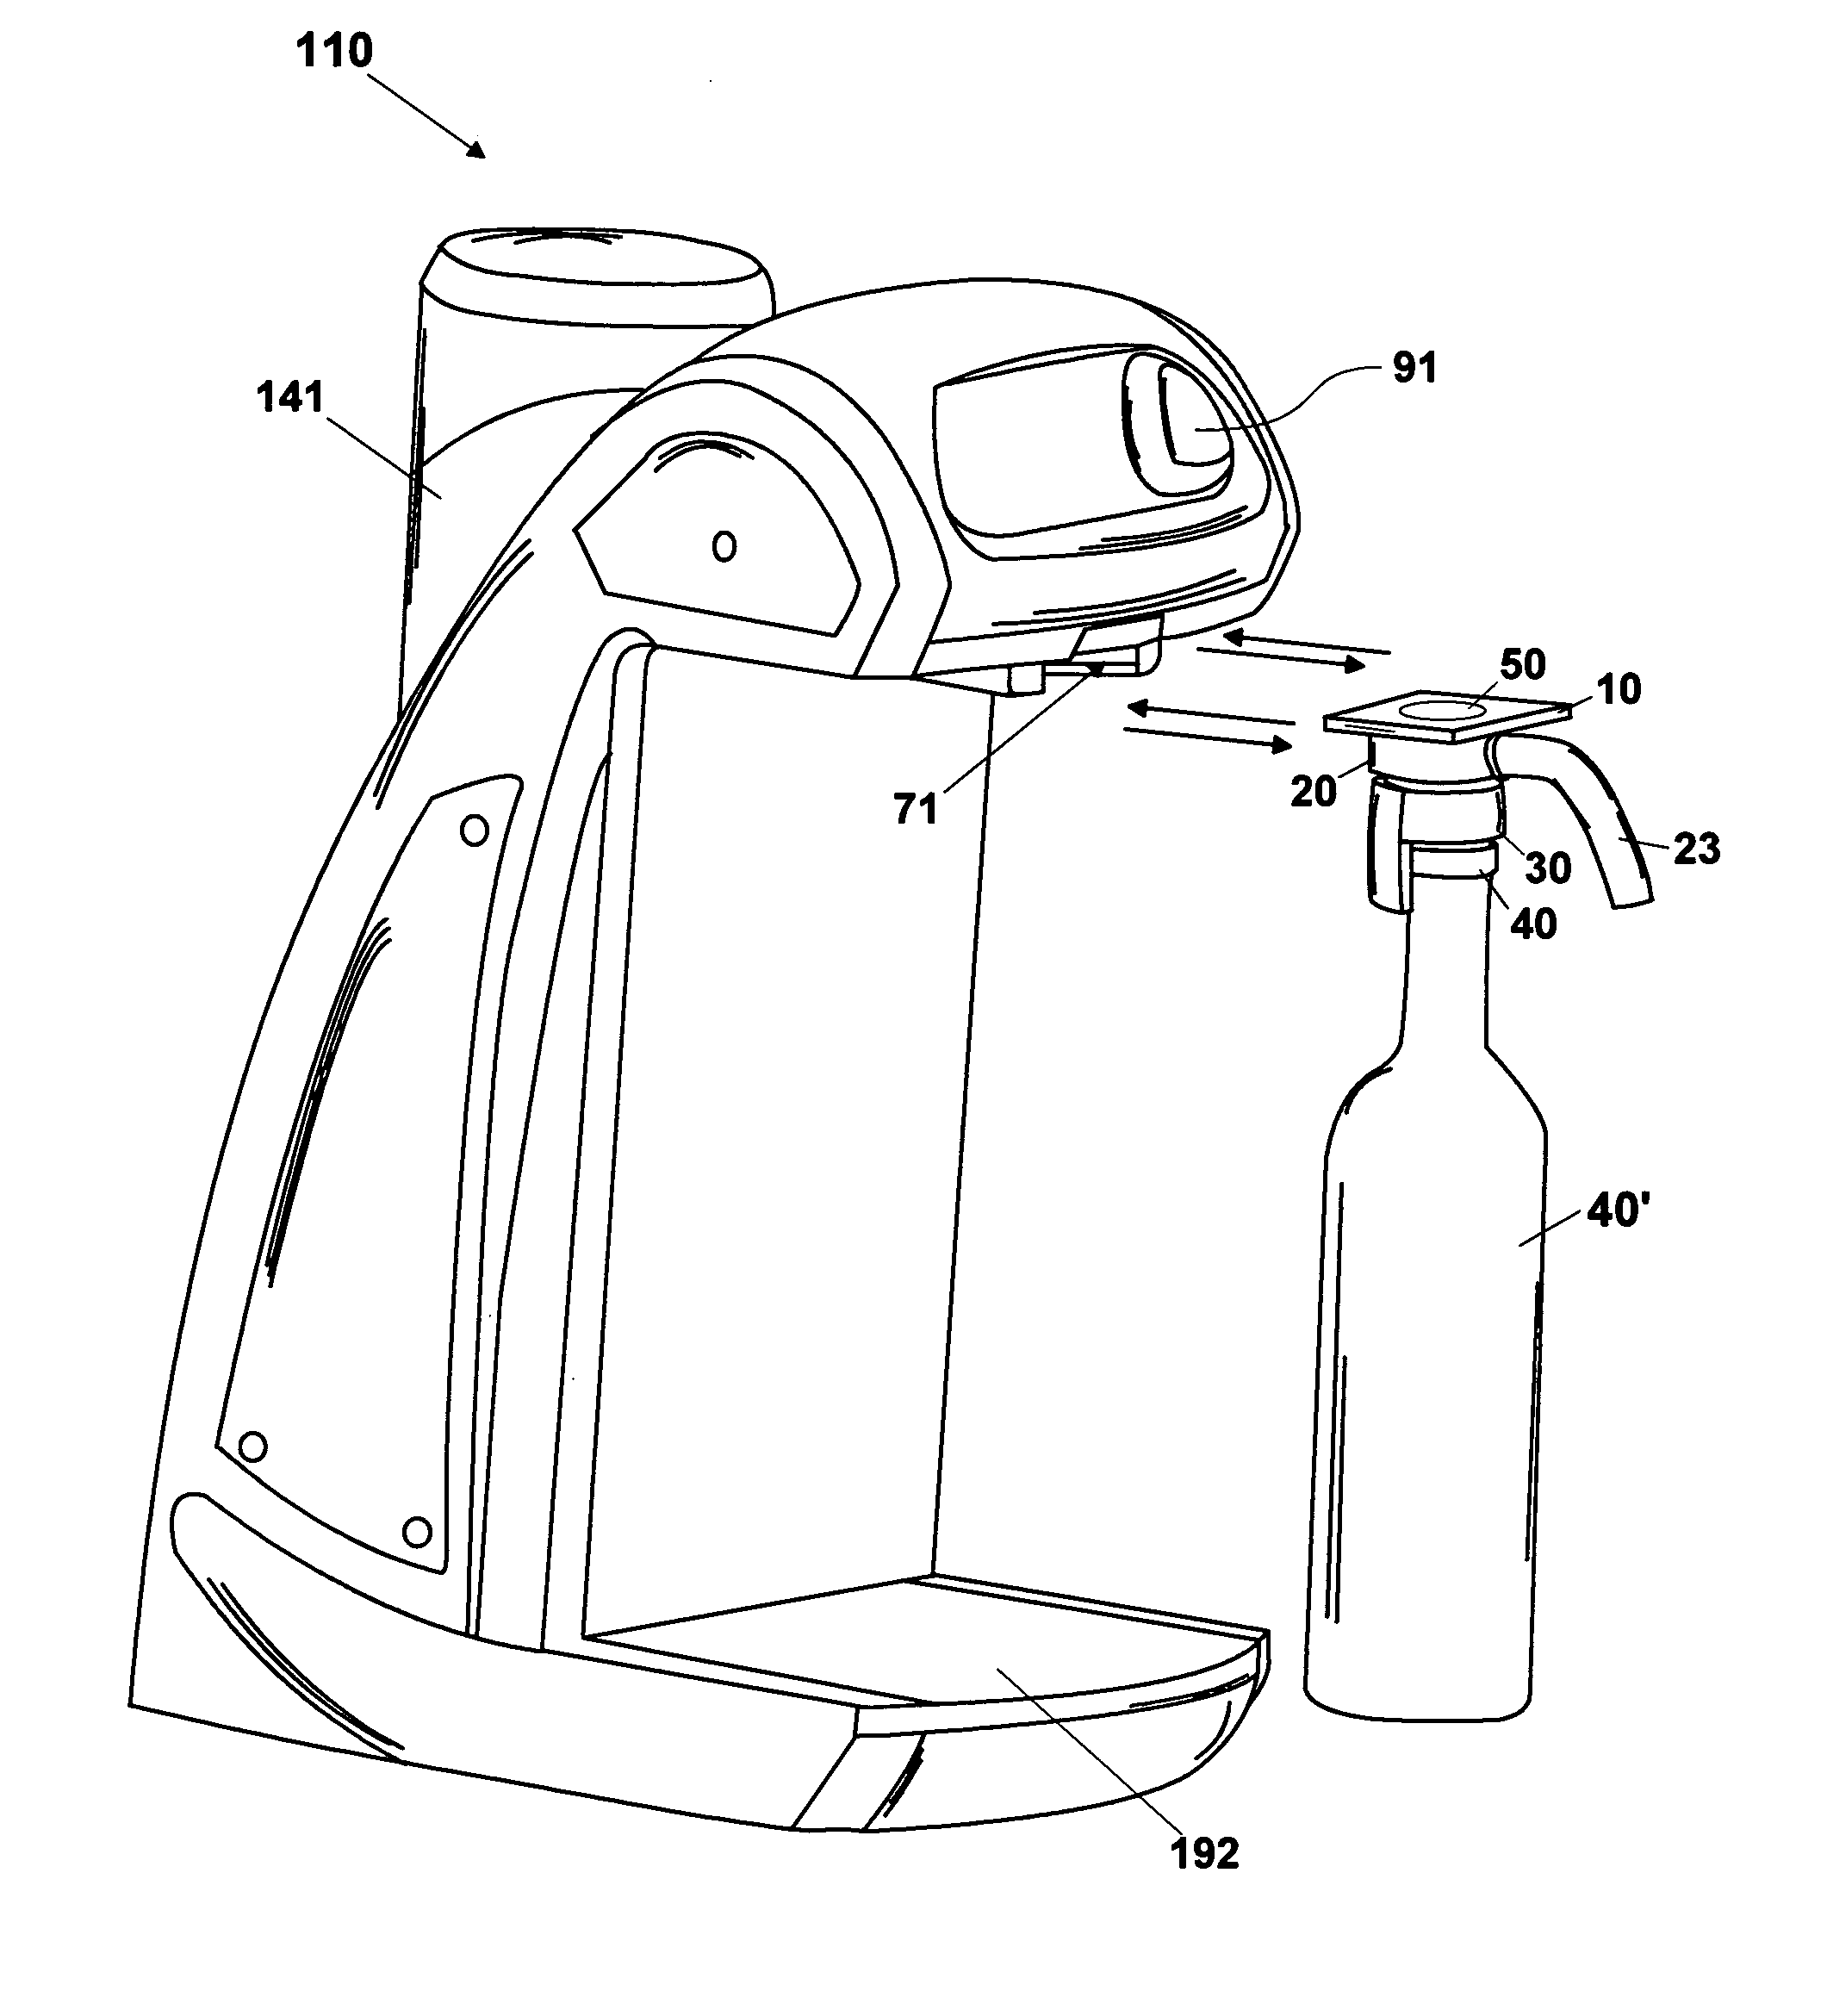 Apparatus for preserving and serving by-the-glass wine, or other liquid that can be affected by oxygen